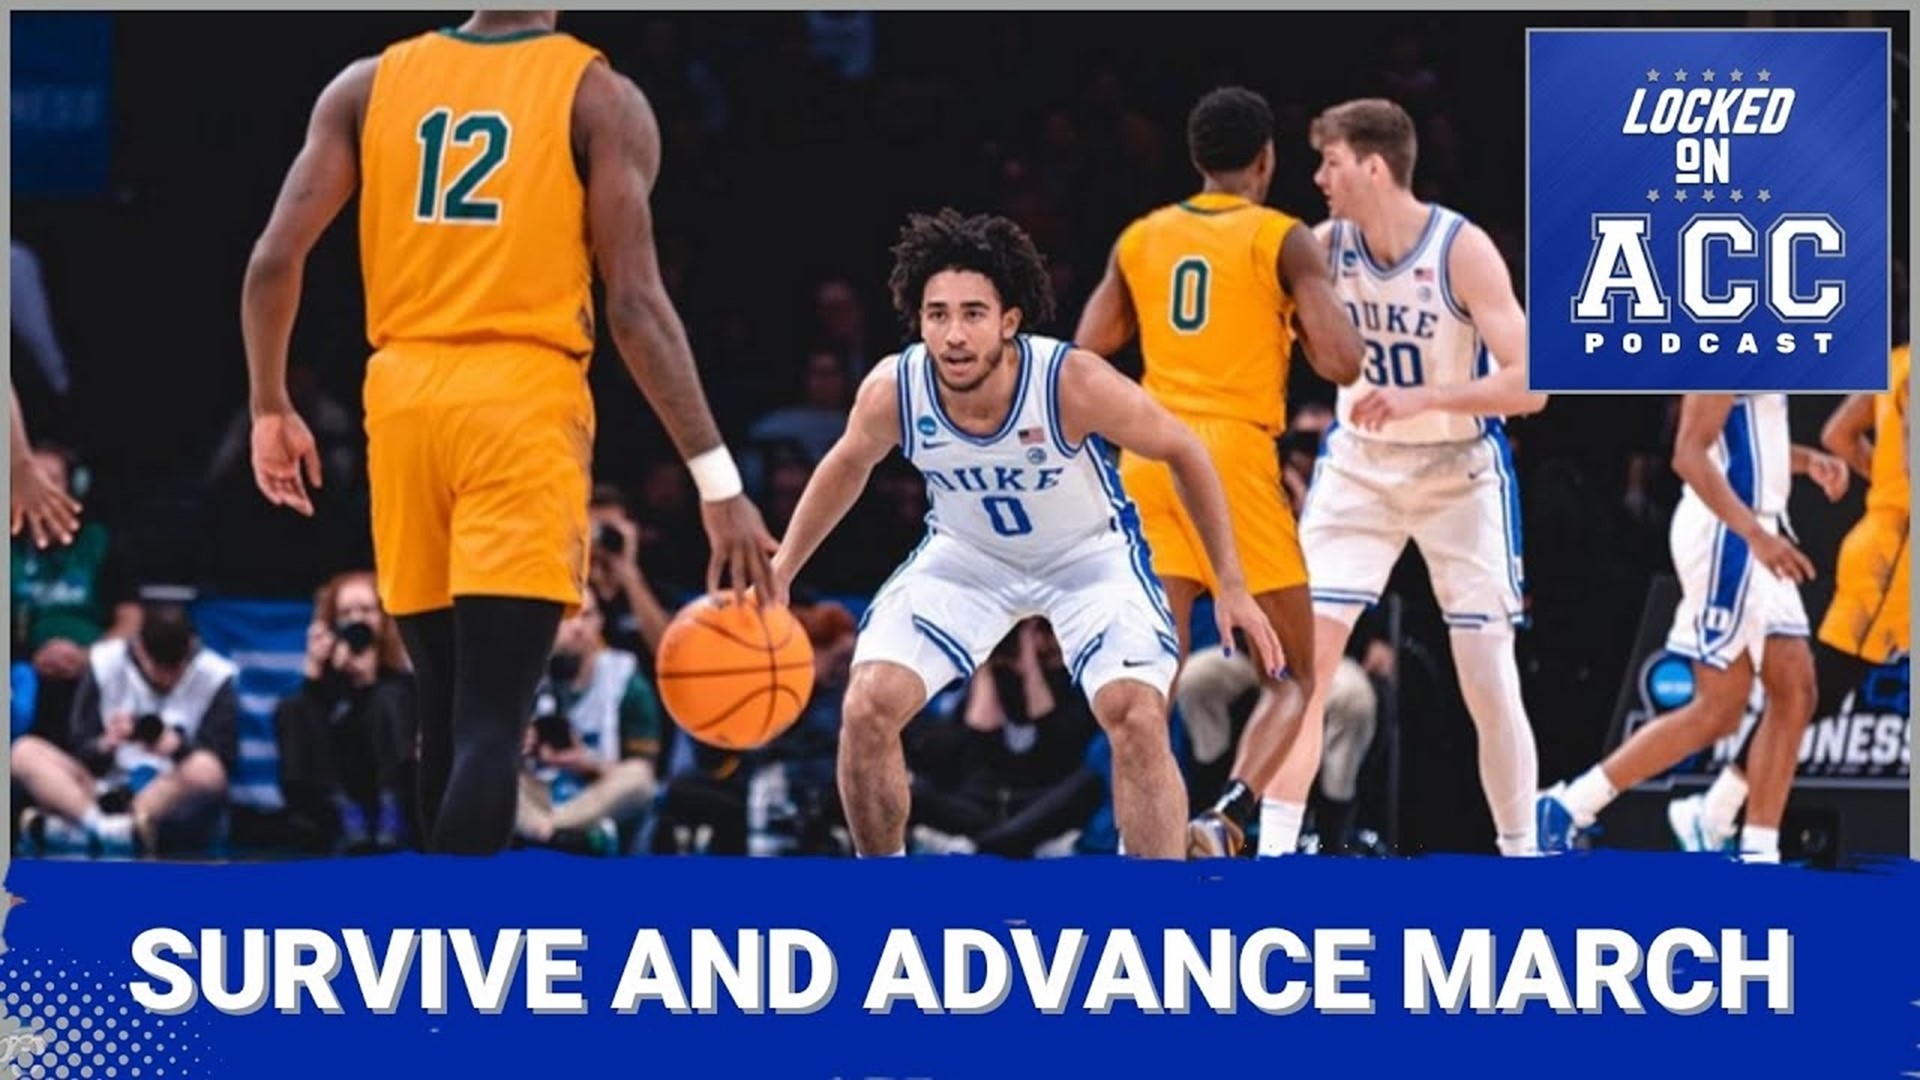 North Carolina, North Carolina State, Clemson and Duke pick up wins in their first matchups of the NCAA Tournament. How has the conference compared to others?